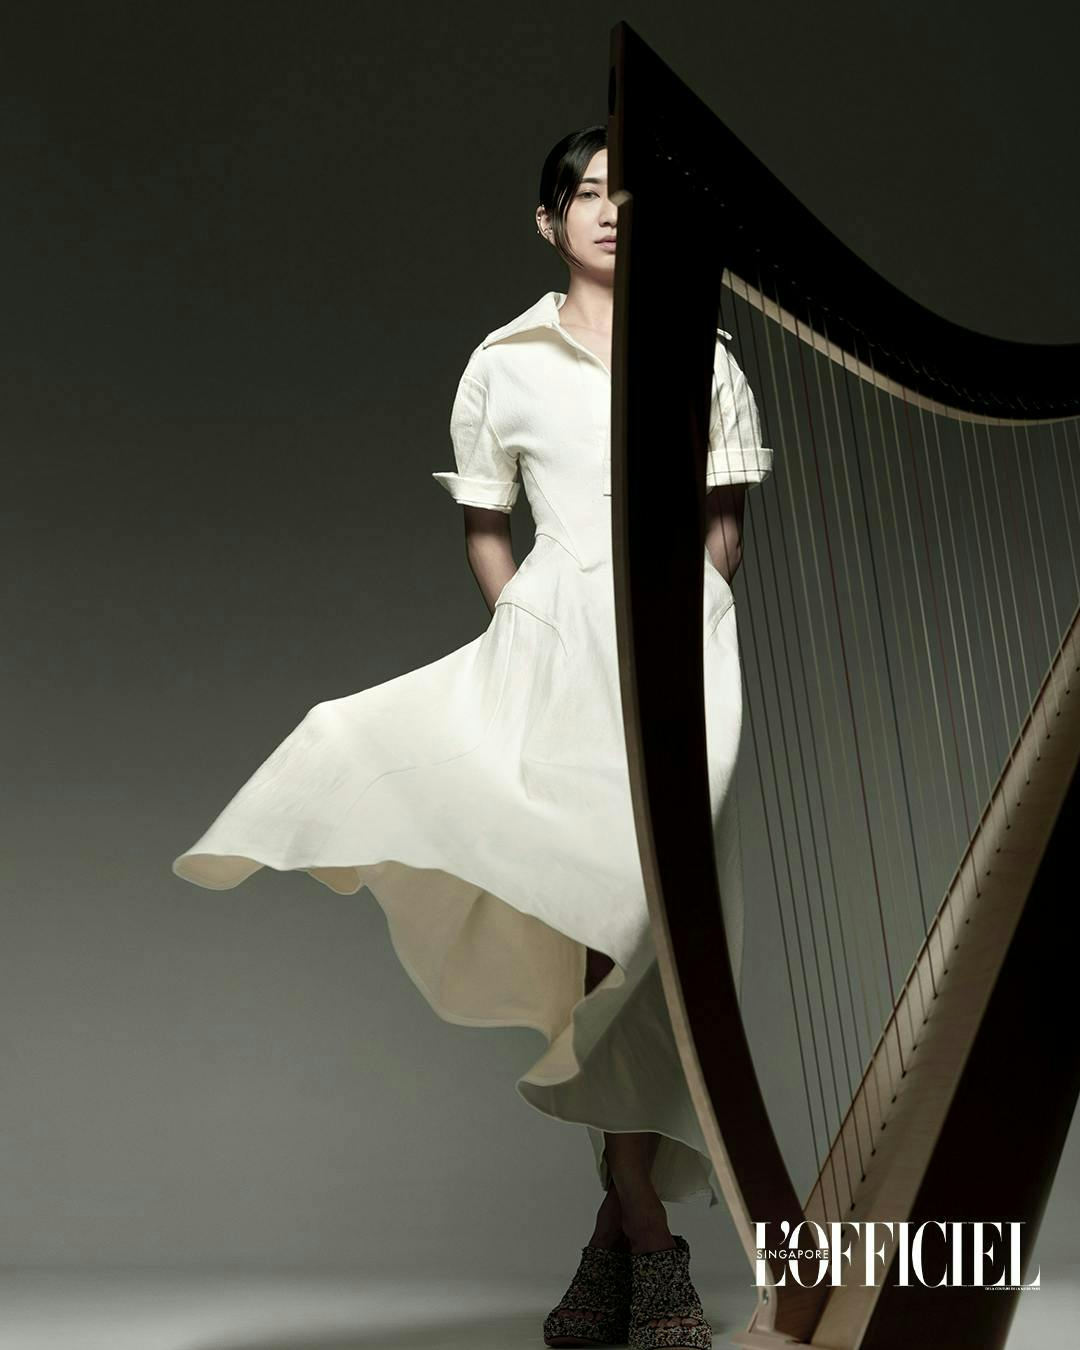 harp musical instrument person human